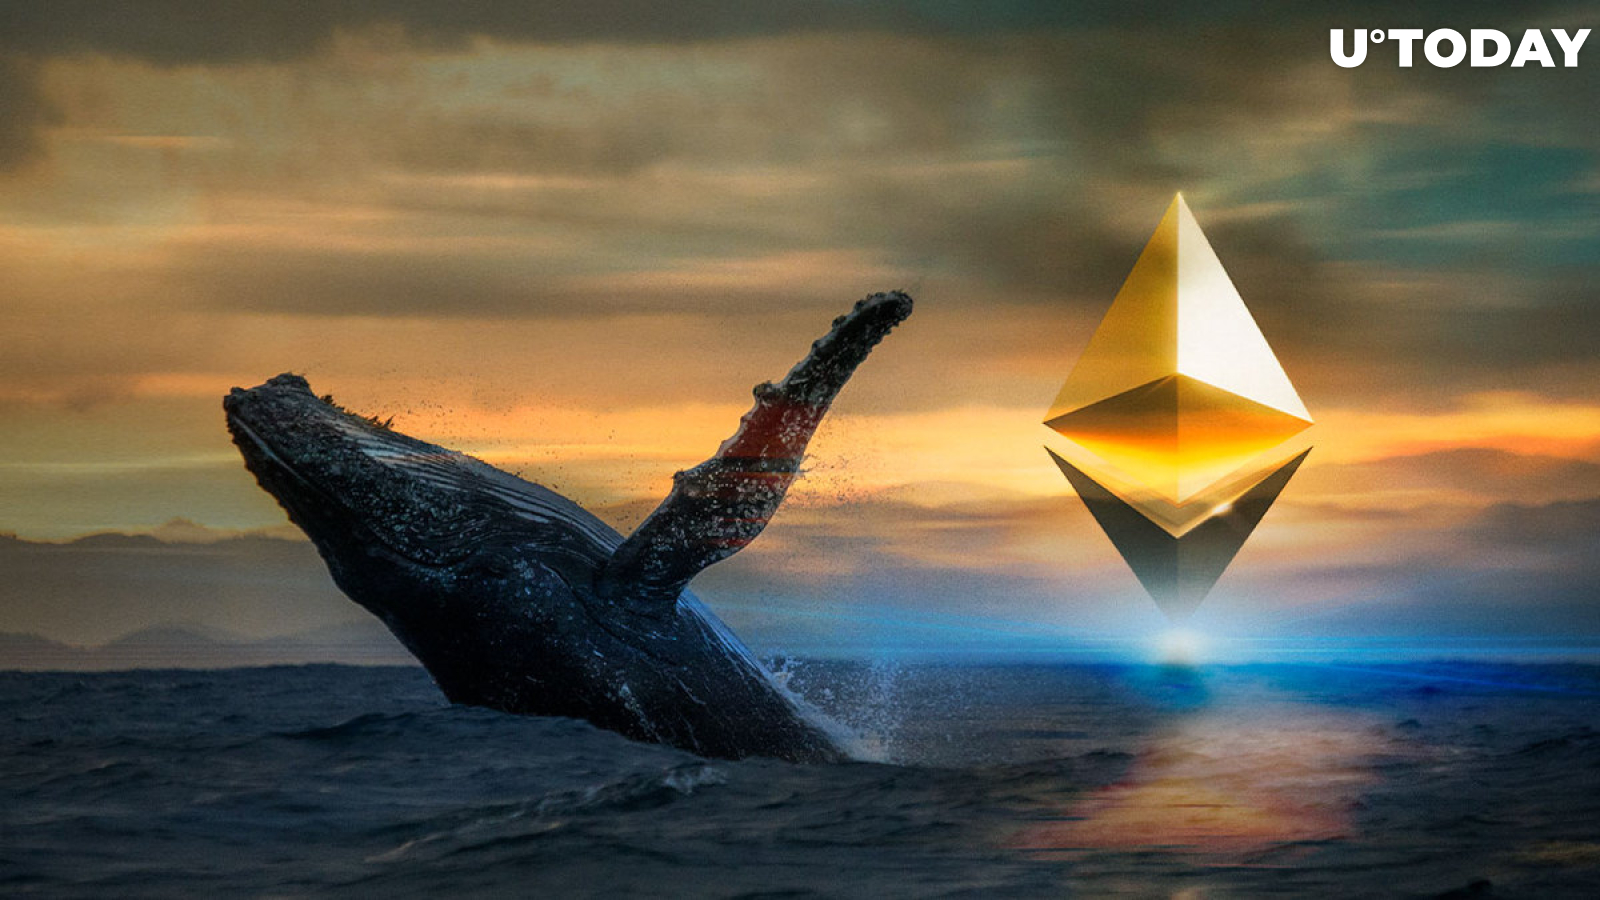 This Ethereum Whale Shoveled $1.7 Billion Worth of Futures in Hour, Here's Why